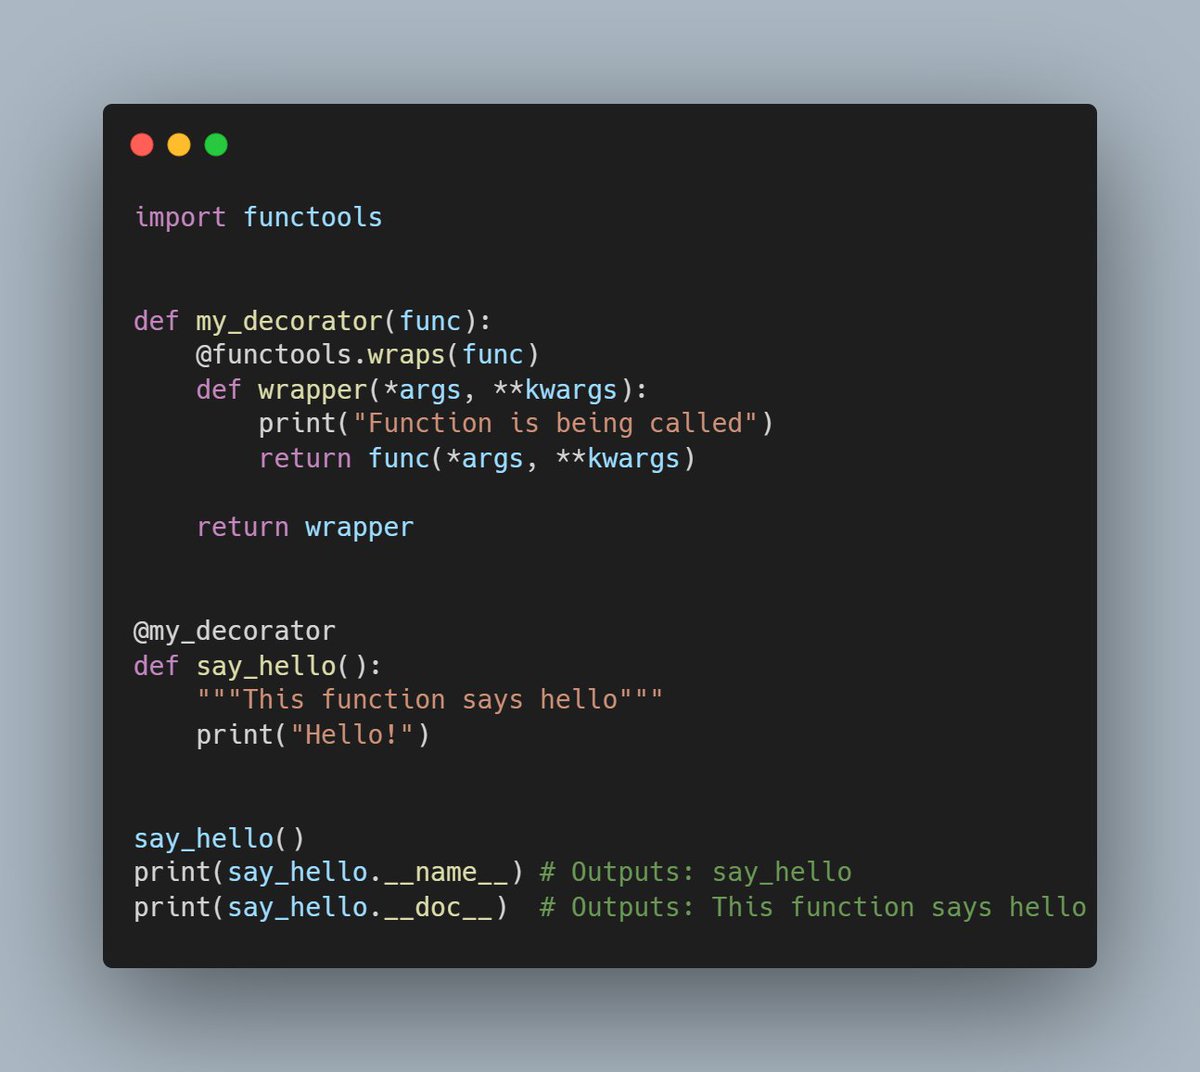 Here is 50 python decorators in #50dayscoding

𝐃𝐞𝐜𝐨𝐫𝐚𝐭𝐨𝐫 𝟏:  functools.wraps

Description and gitHub link in comment 👇

#buildinPublic #LearnEveryday #LearninPublic